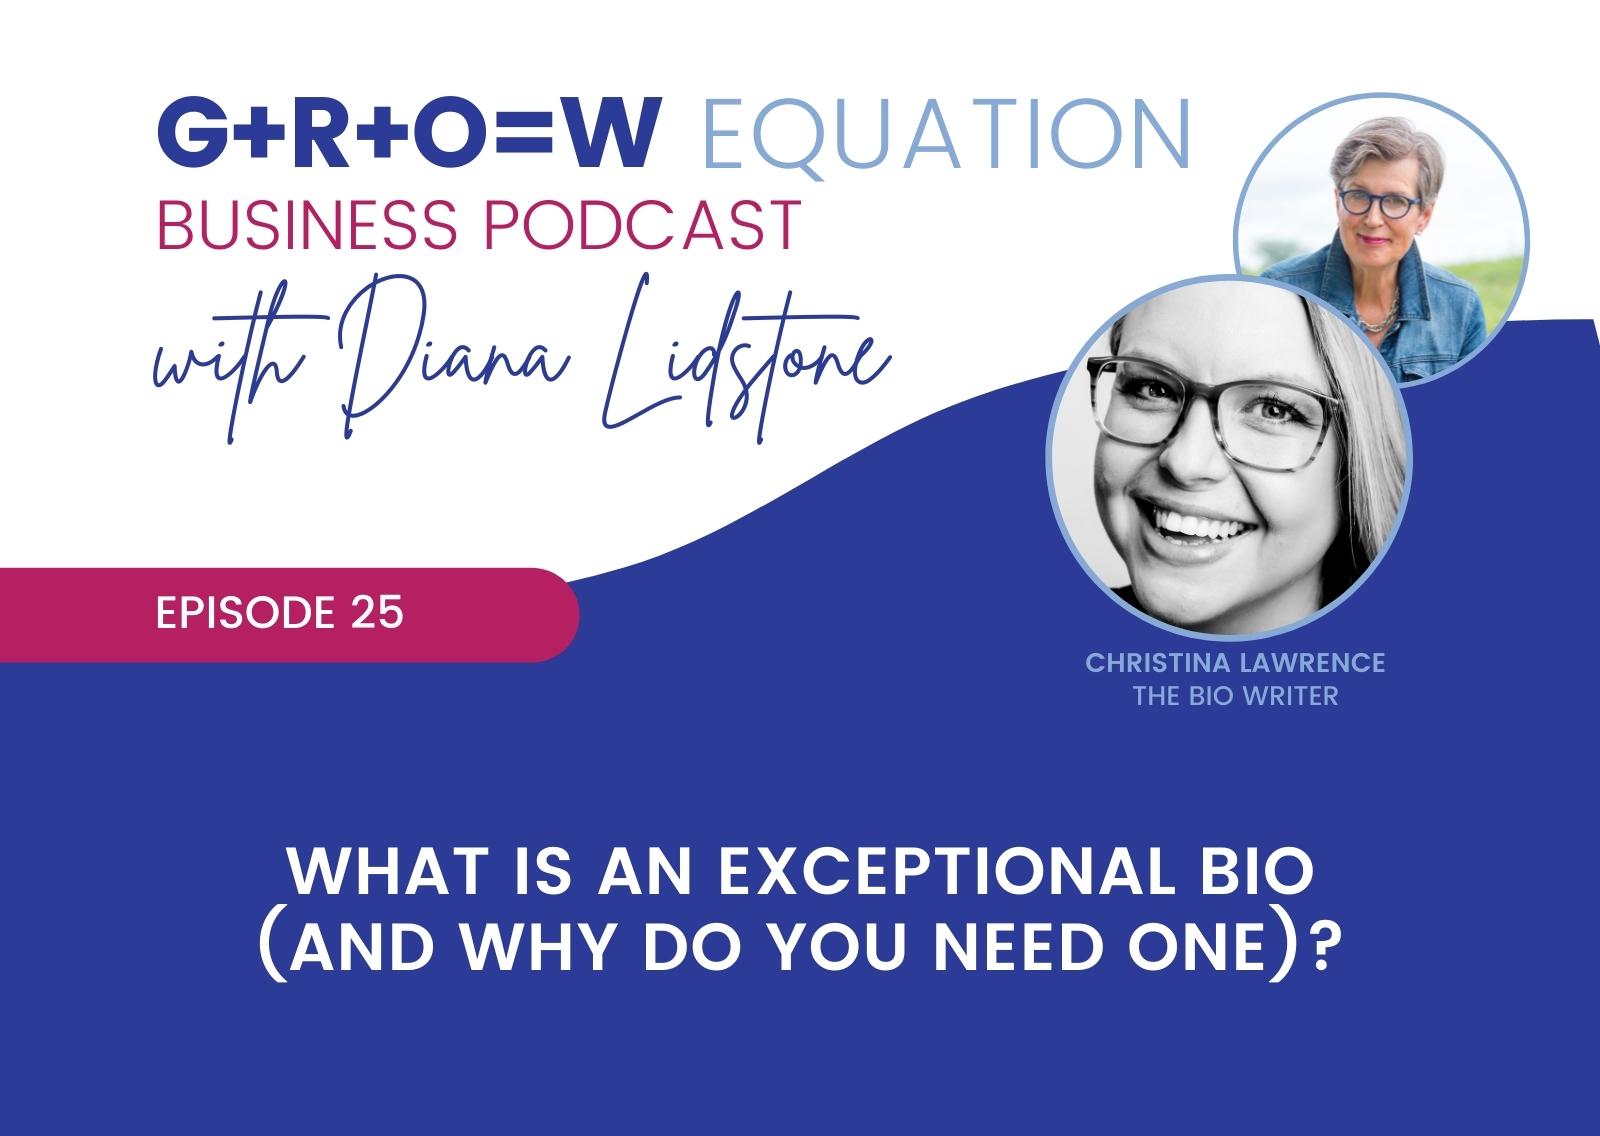 The GROW Equation podcast Episode 25